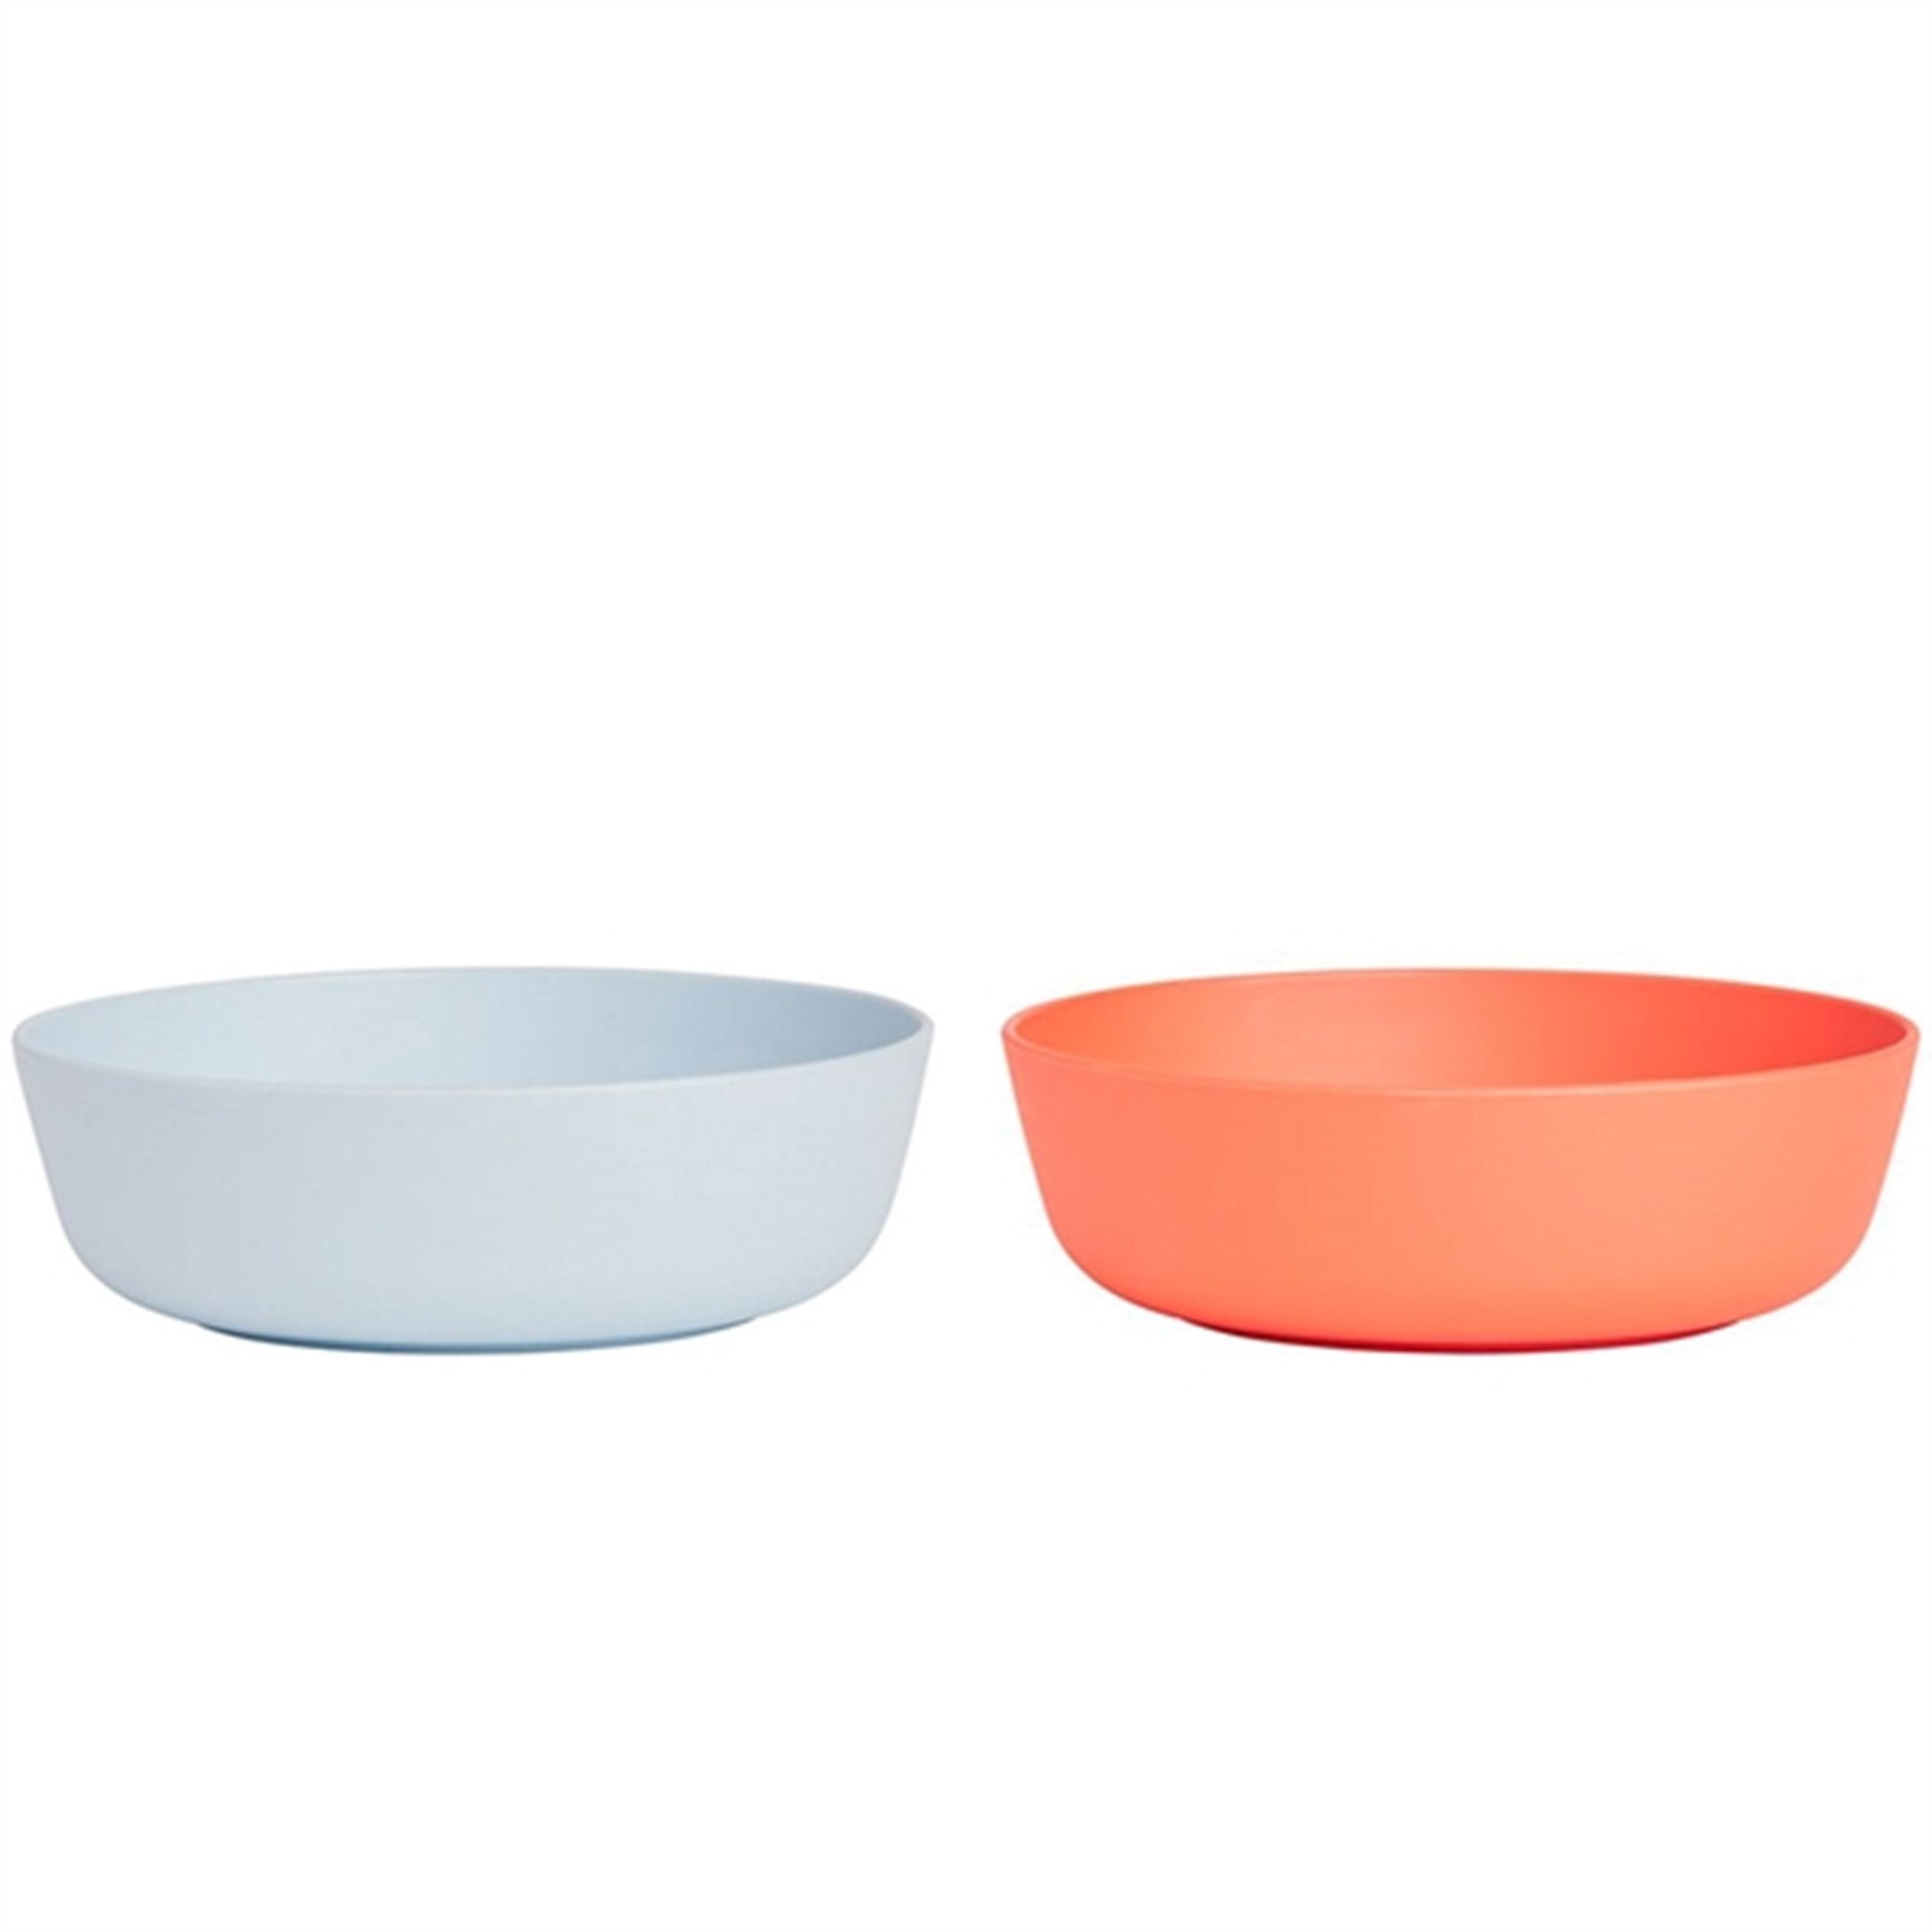 OYOY Yummy Bowl 2-pack Ice Blue / Apricot 6